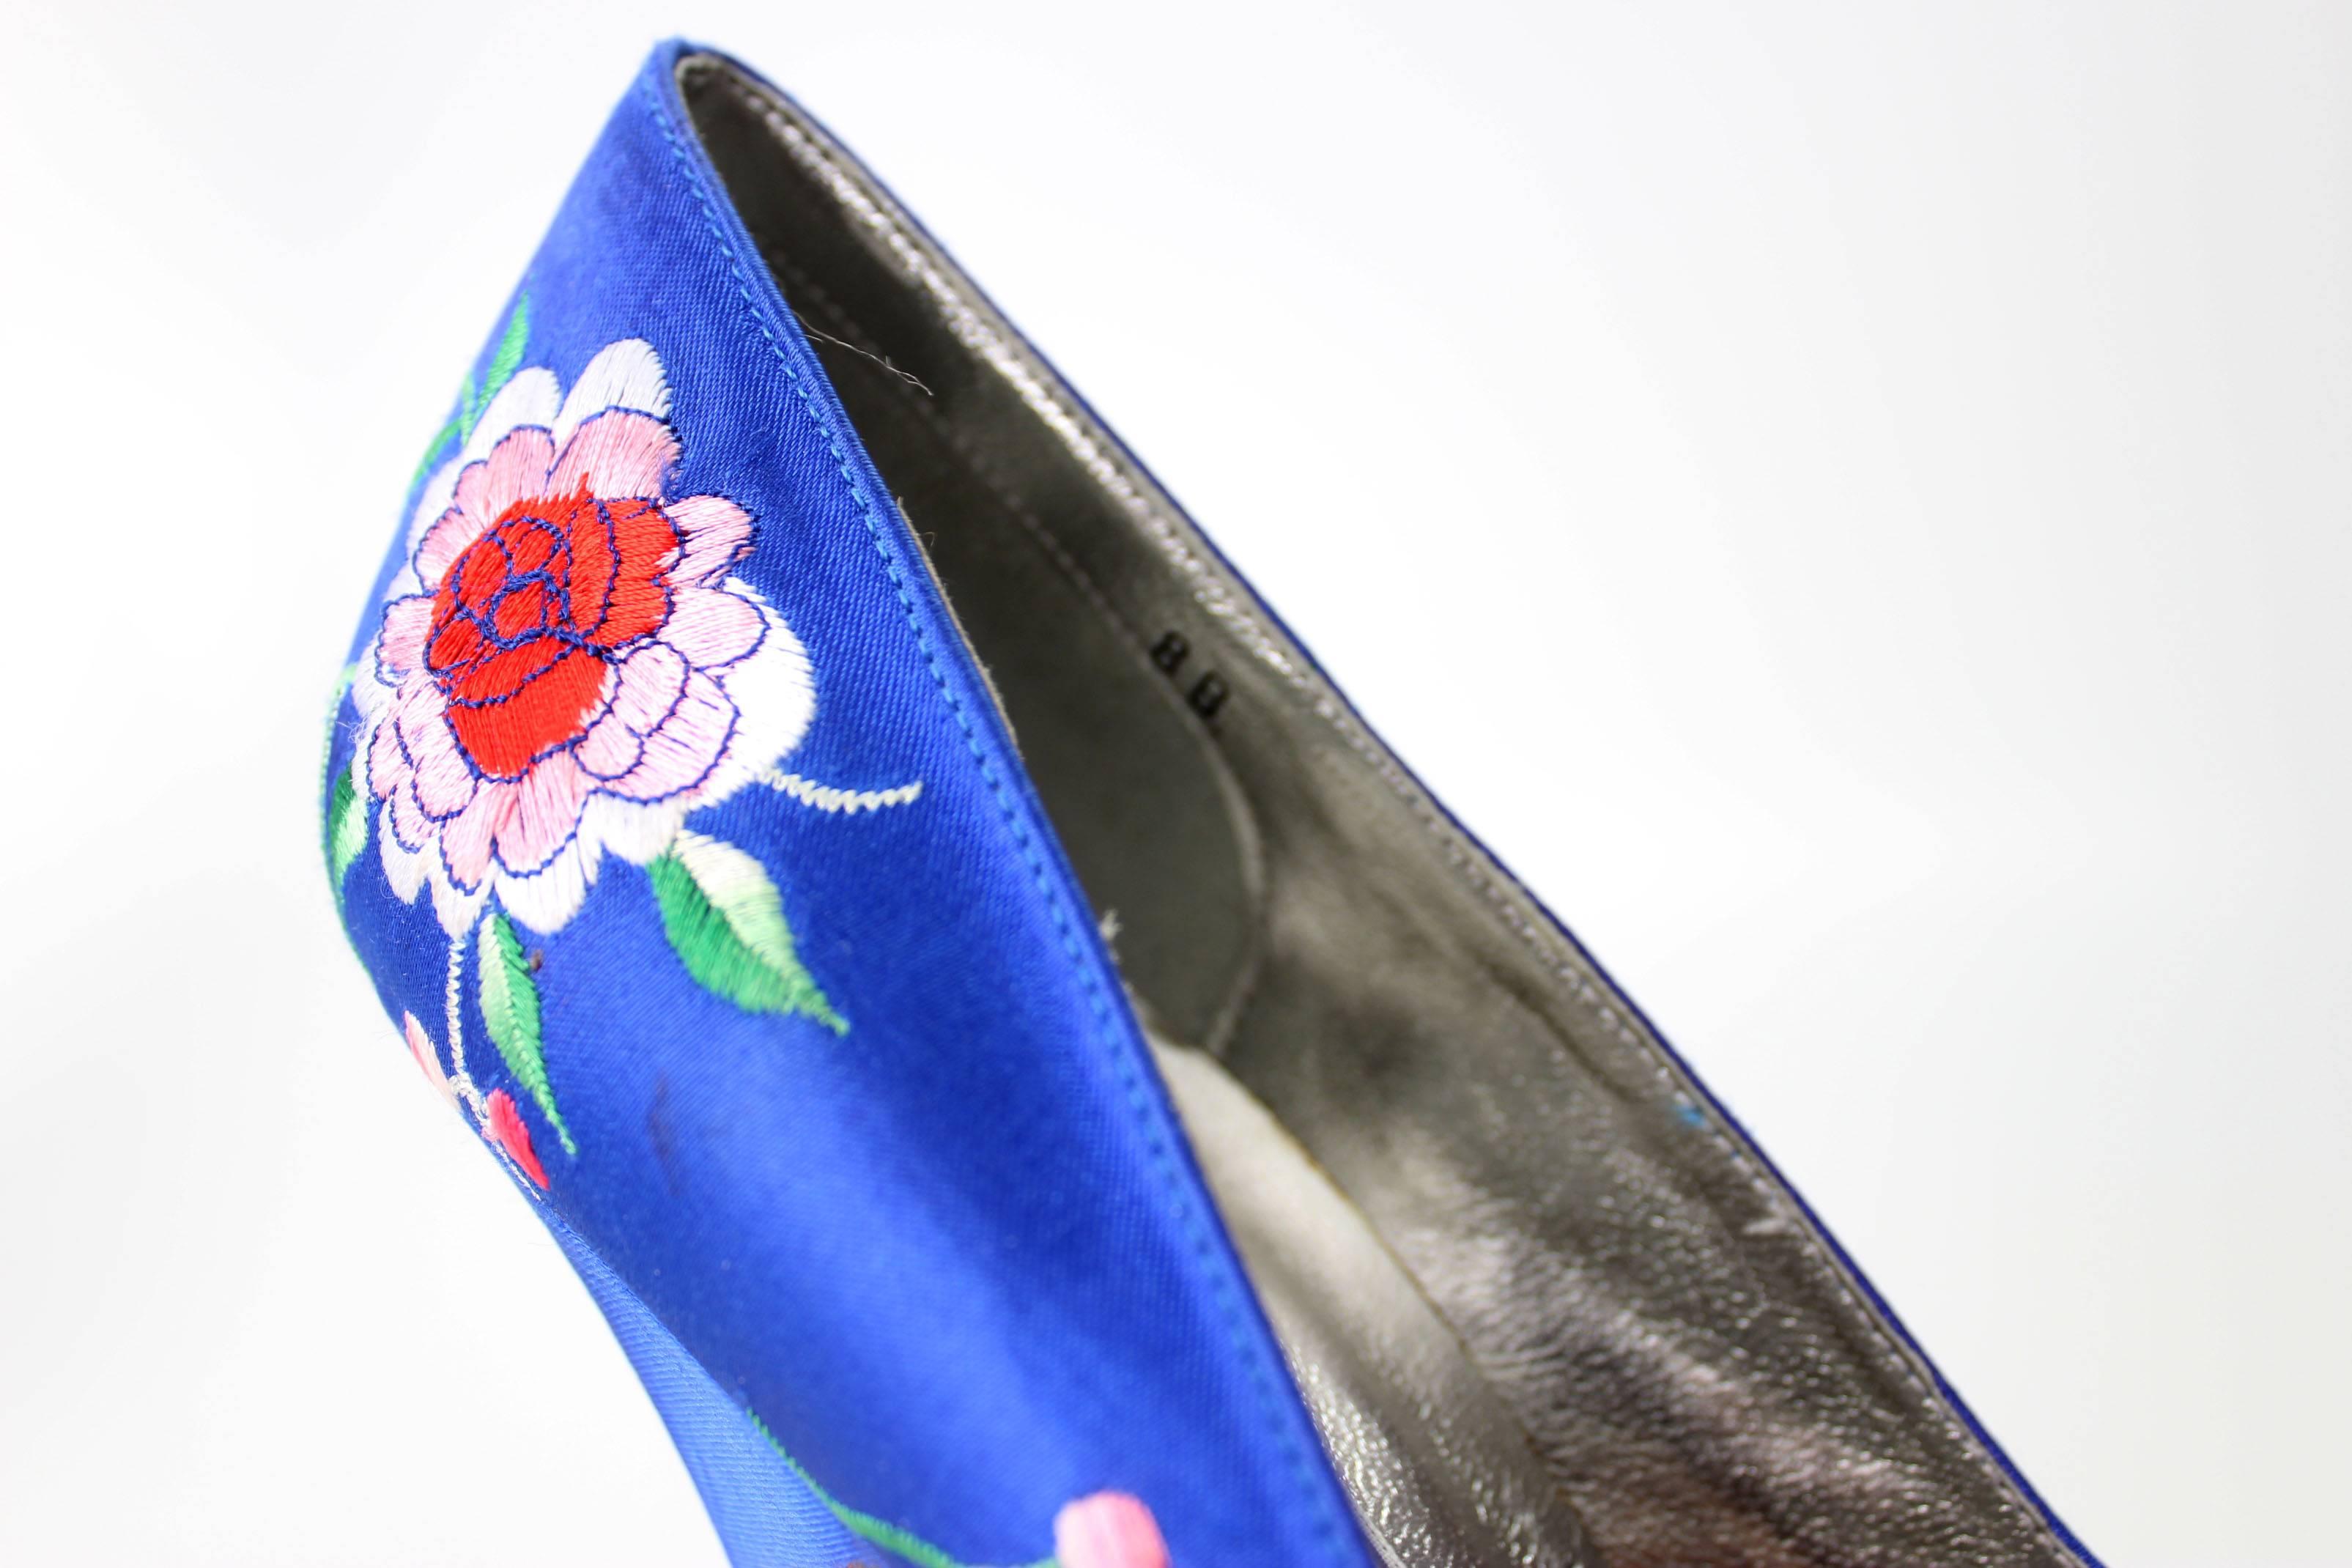 These never worn vintage Norma Kamali pumps are outstanding. The delicate embroidery on the rich blue satin background is in an intricate floral motif.  The style is a timeless pump which is as relevant to fashion today as when they were created in